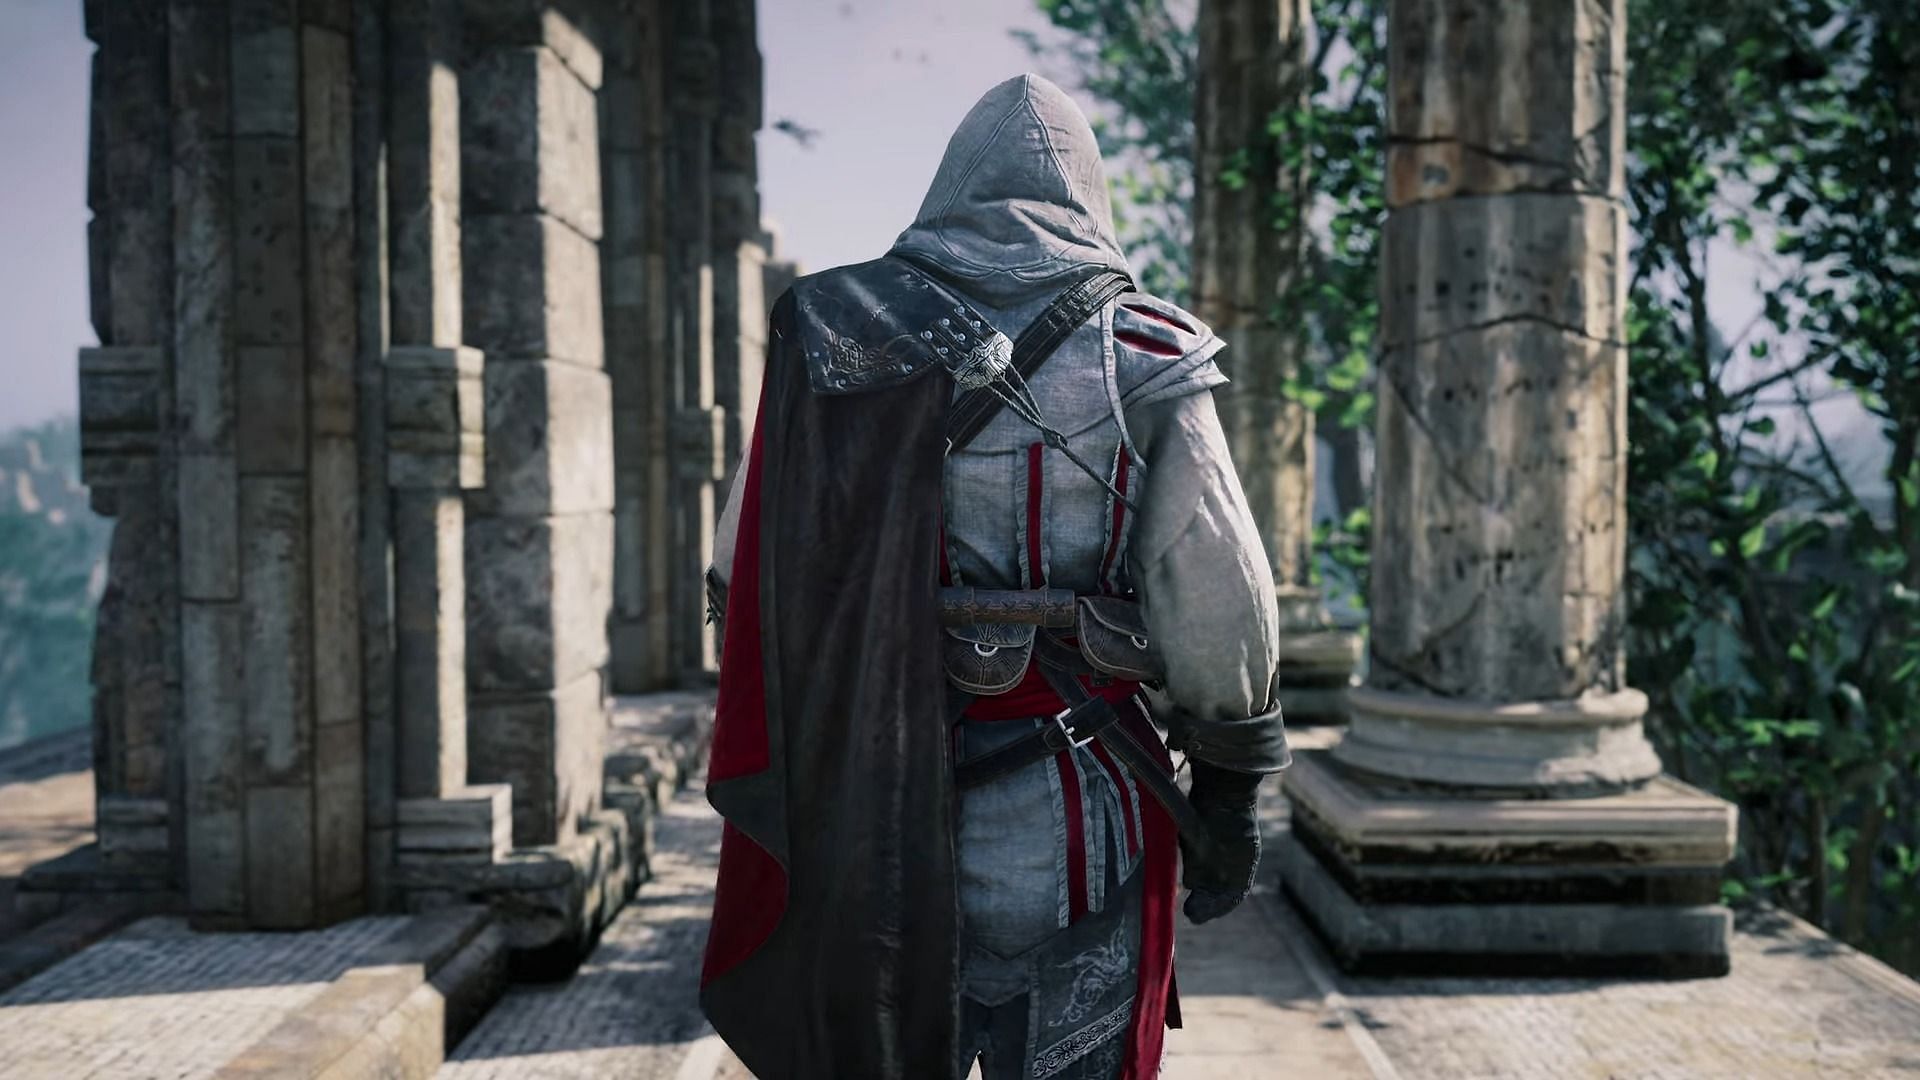 The Young Ezio legacy outfit was recently added to Assassin